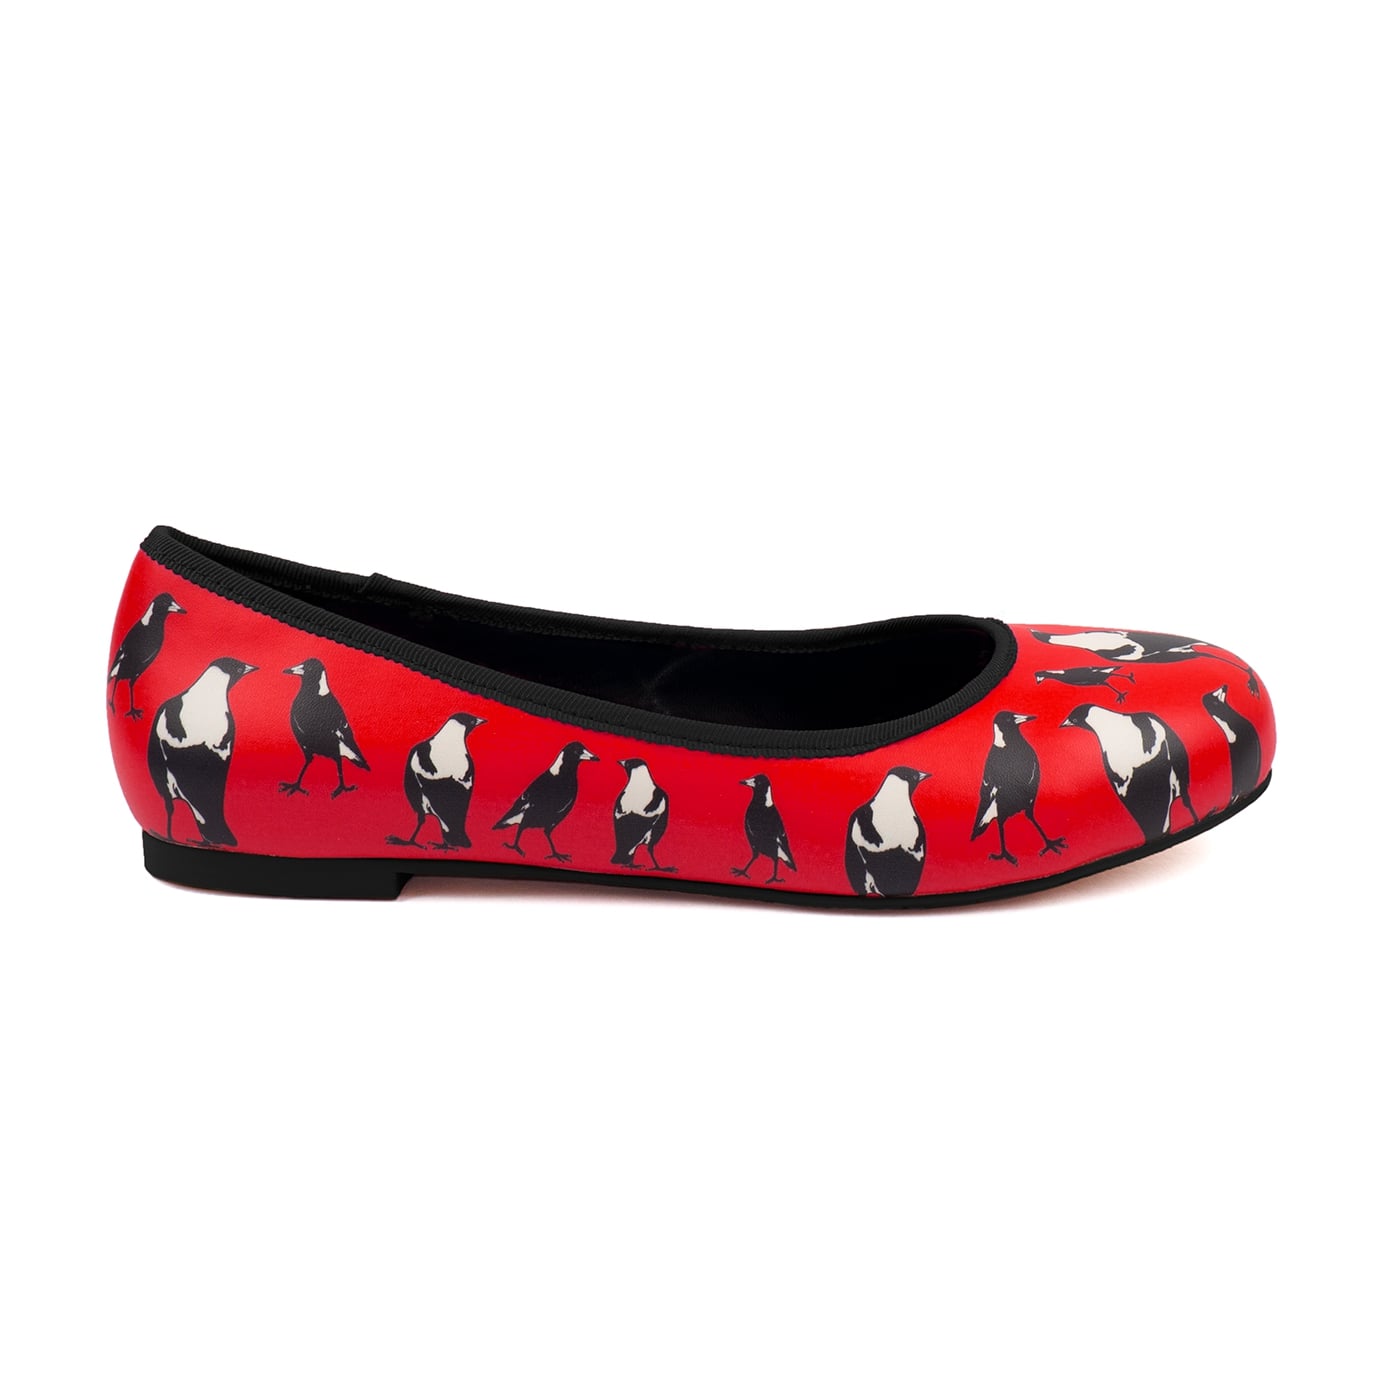 Charm Ballet Flats by RainbowsAndFairies.com (Magpies - Red - Black& White - Slip Ons - Mismatched Shoes) - SKU: FW_BALET_CHARM_ORG - Pic 04